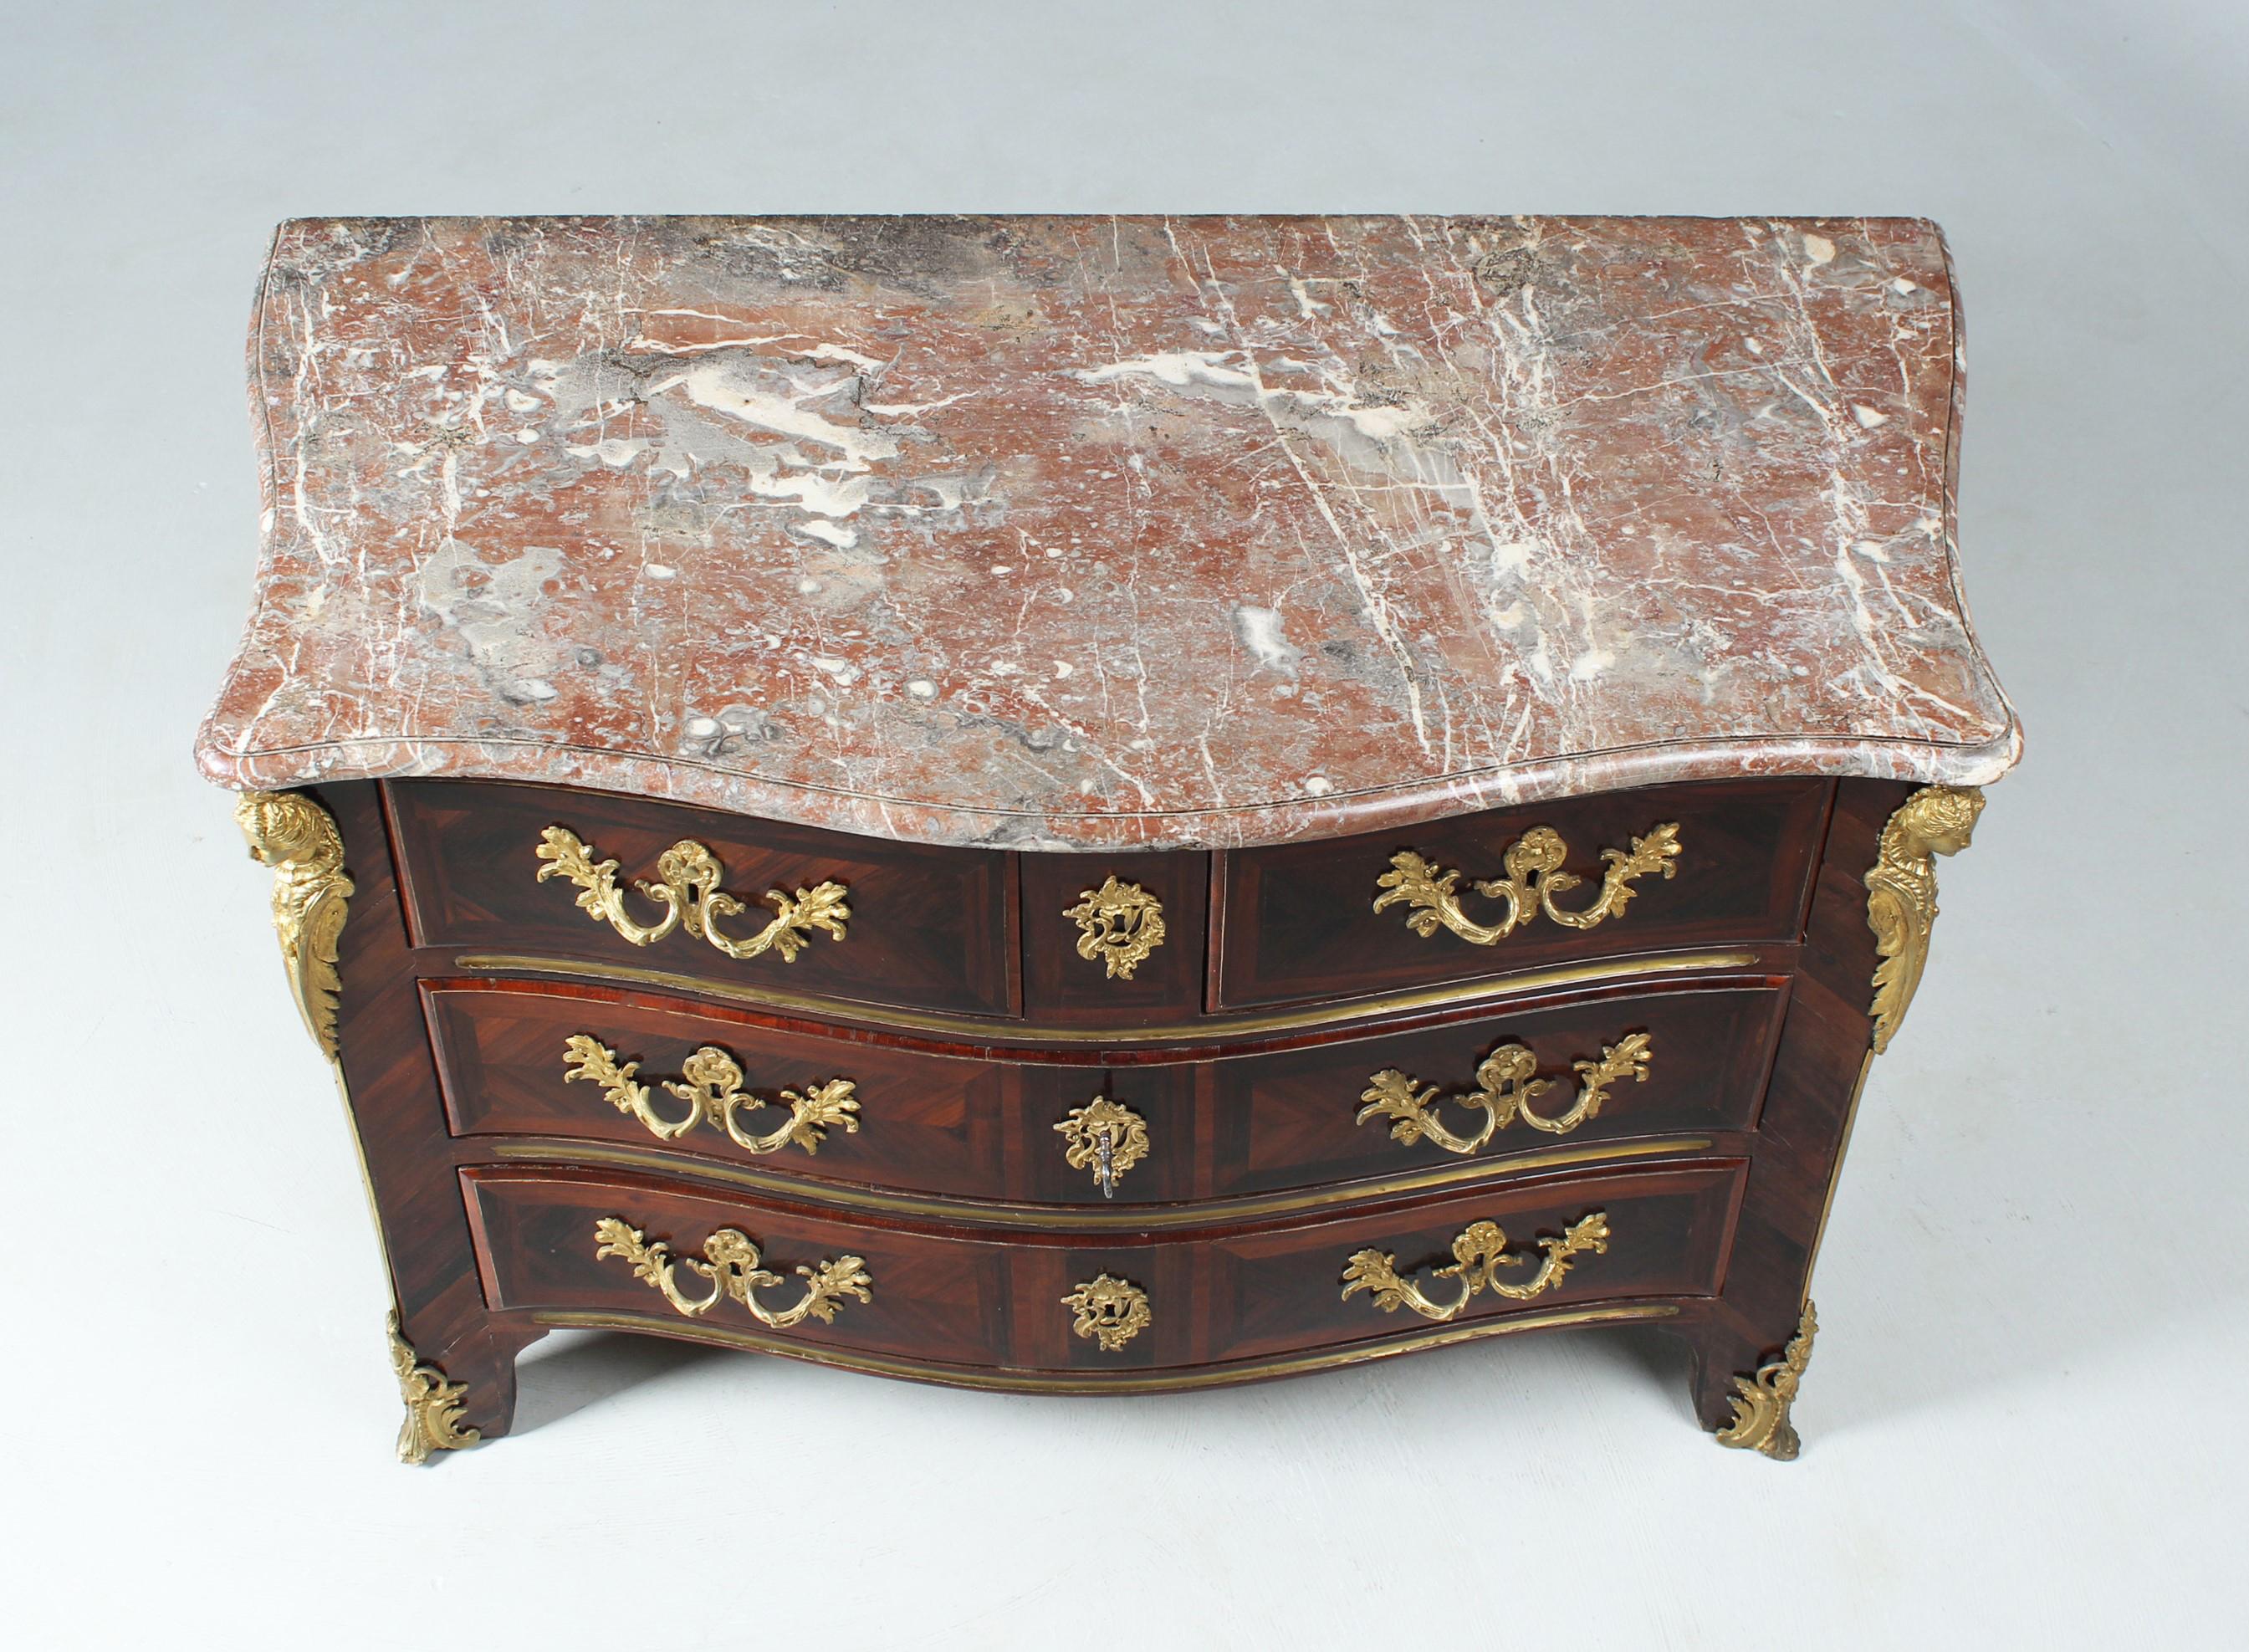 French Regence Chest of Drawers with Ormolu Fittings, Early 18th Century For Sale 7